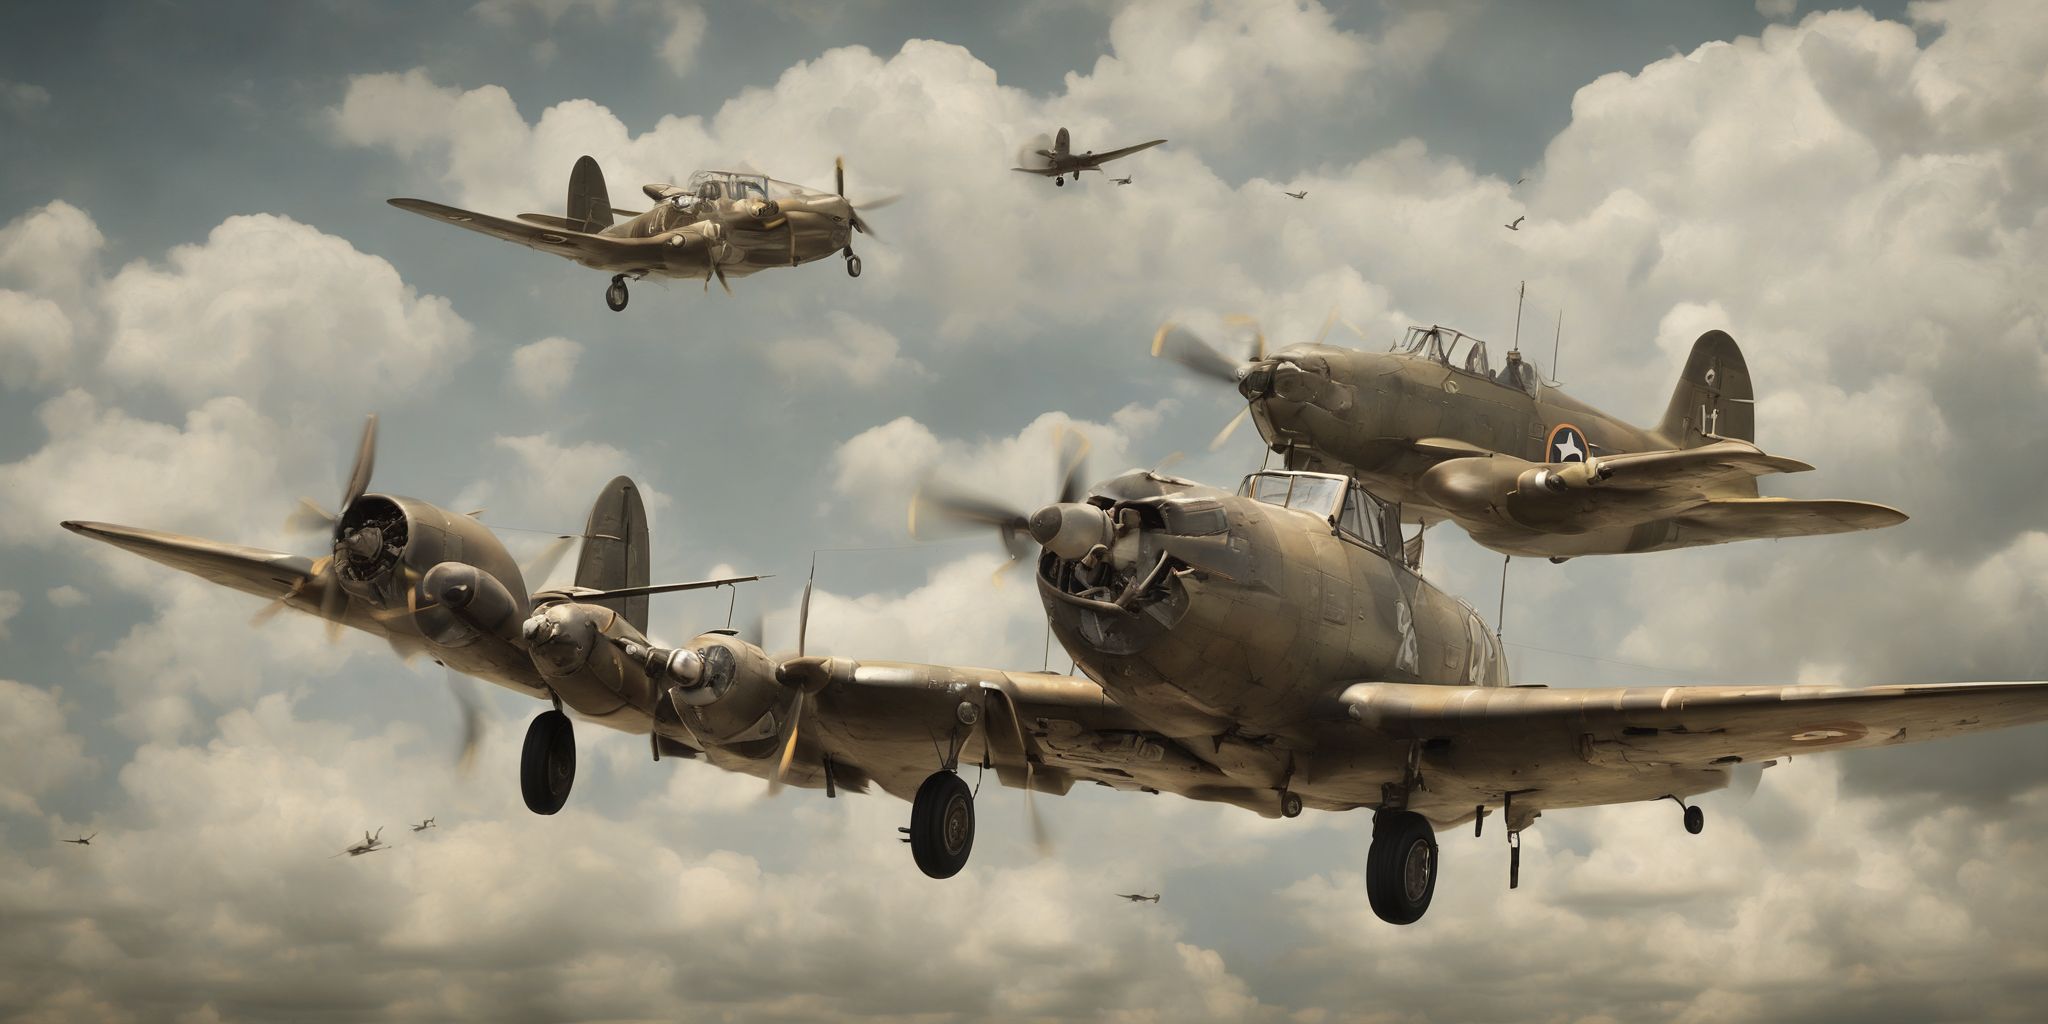 Catch-22  in realistic, photographic style